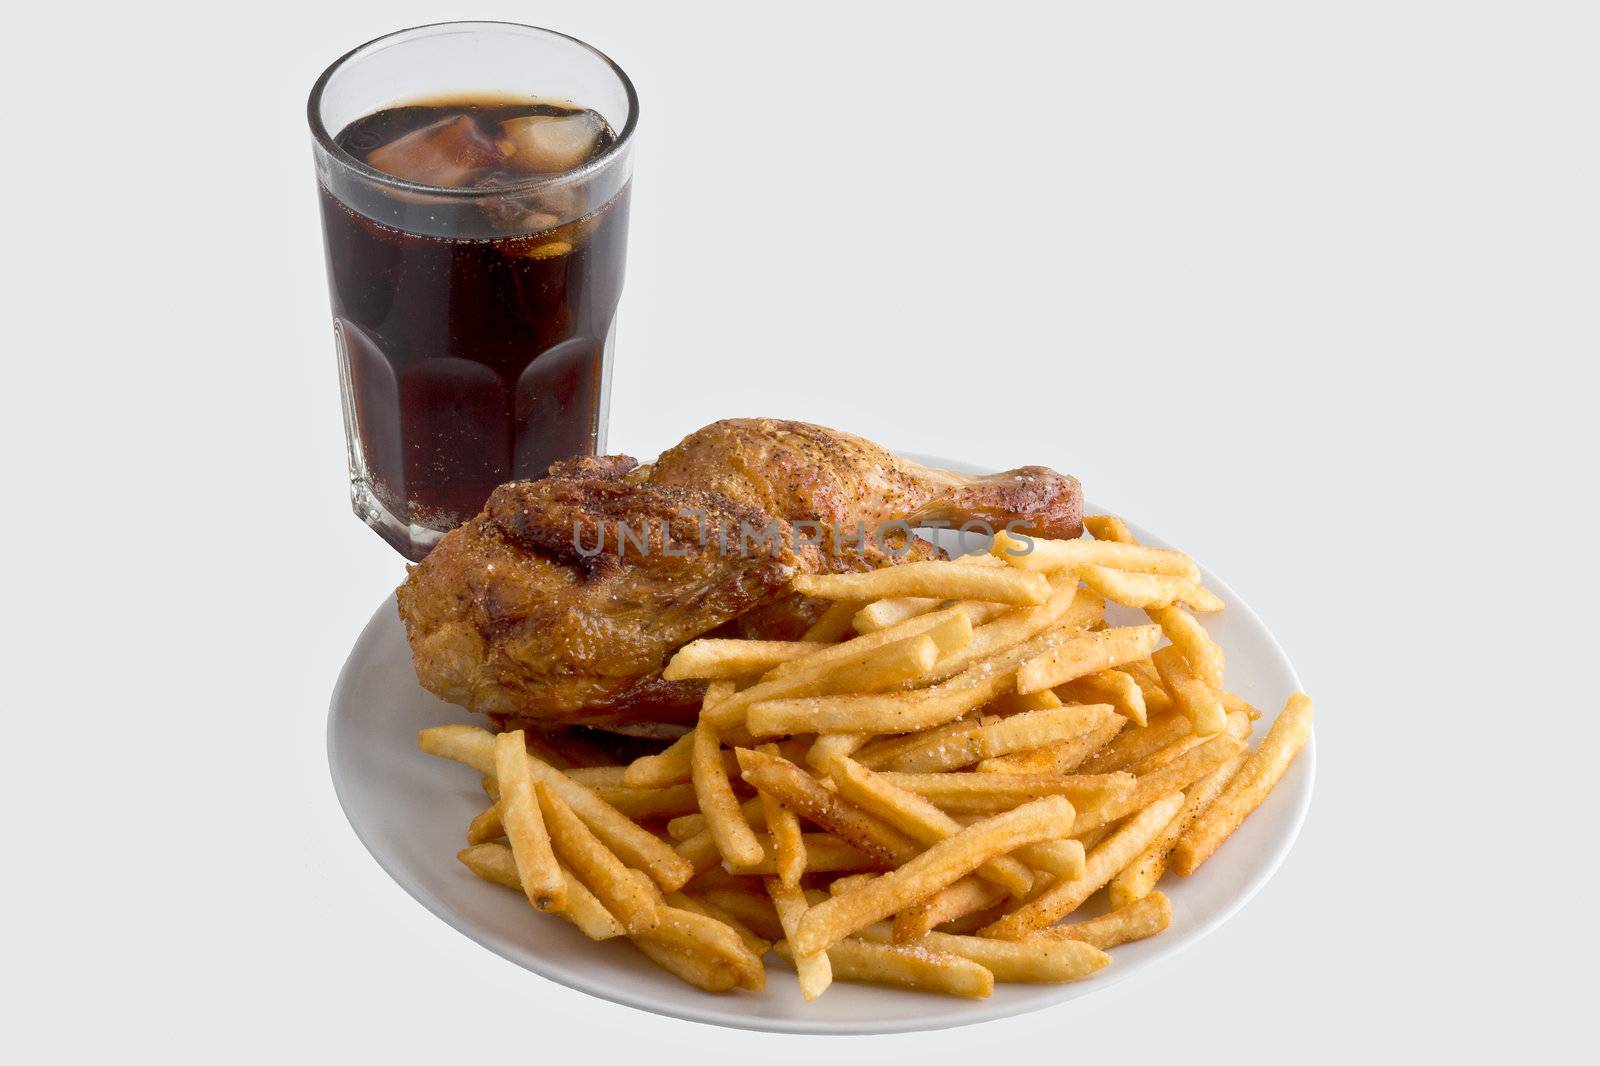 Fried chicken with french fries and cola by lavsen